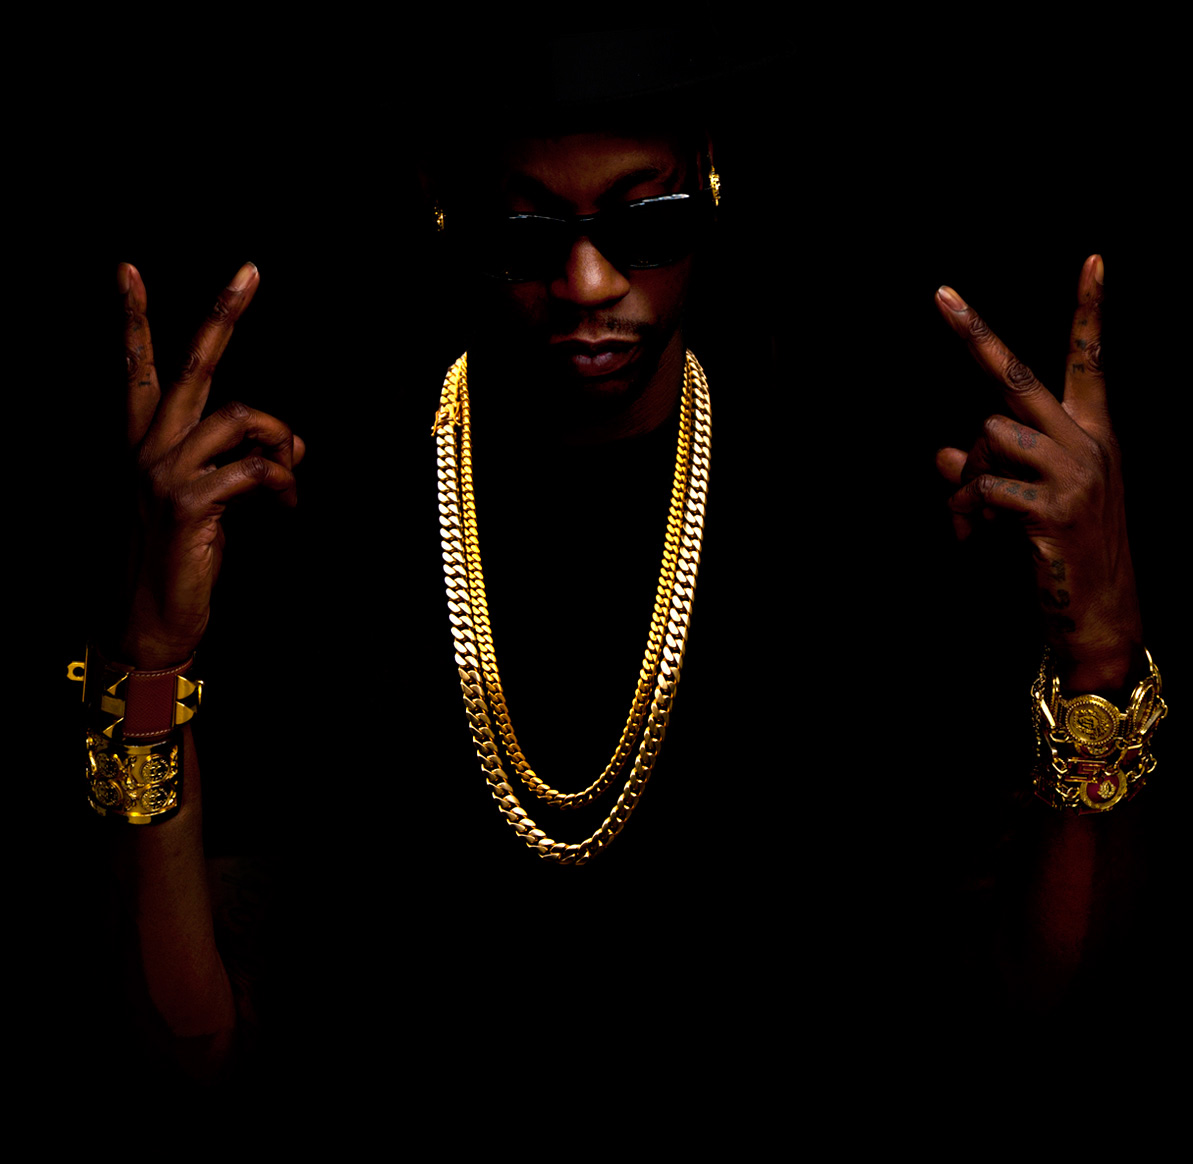 download 2 chainz new song